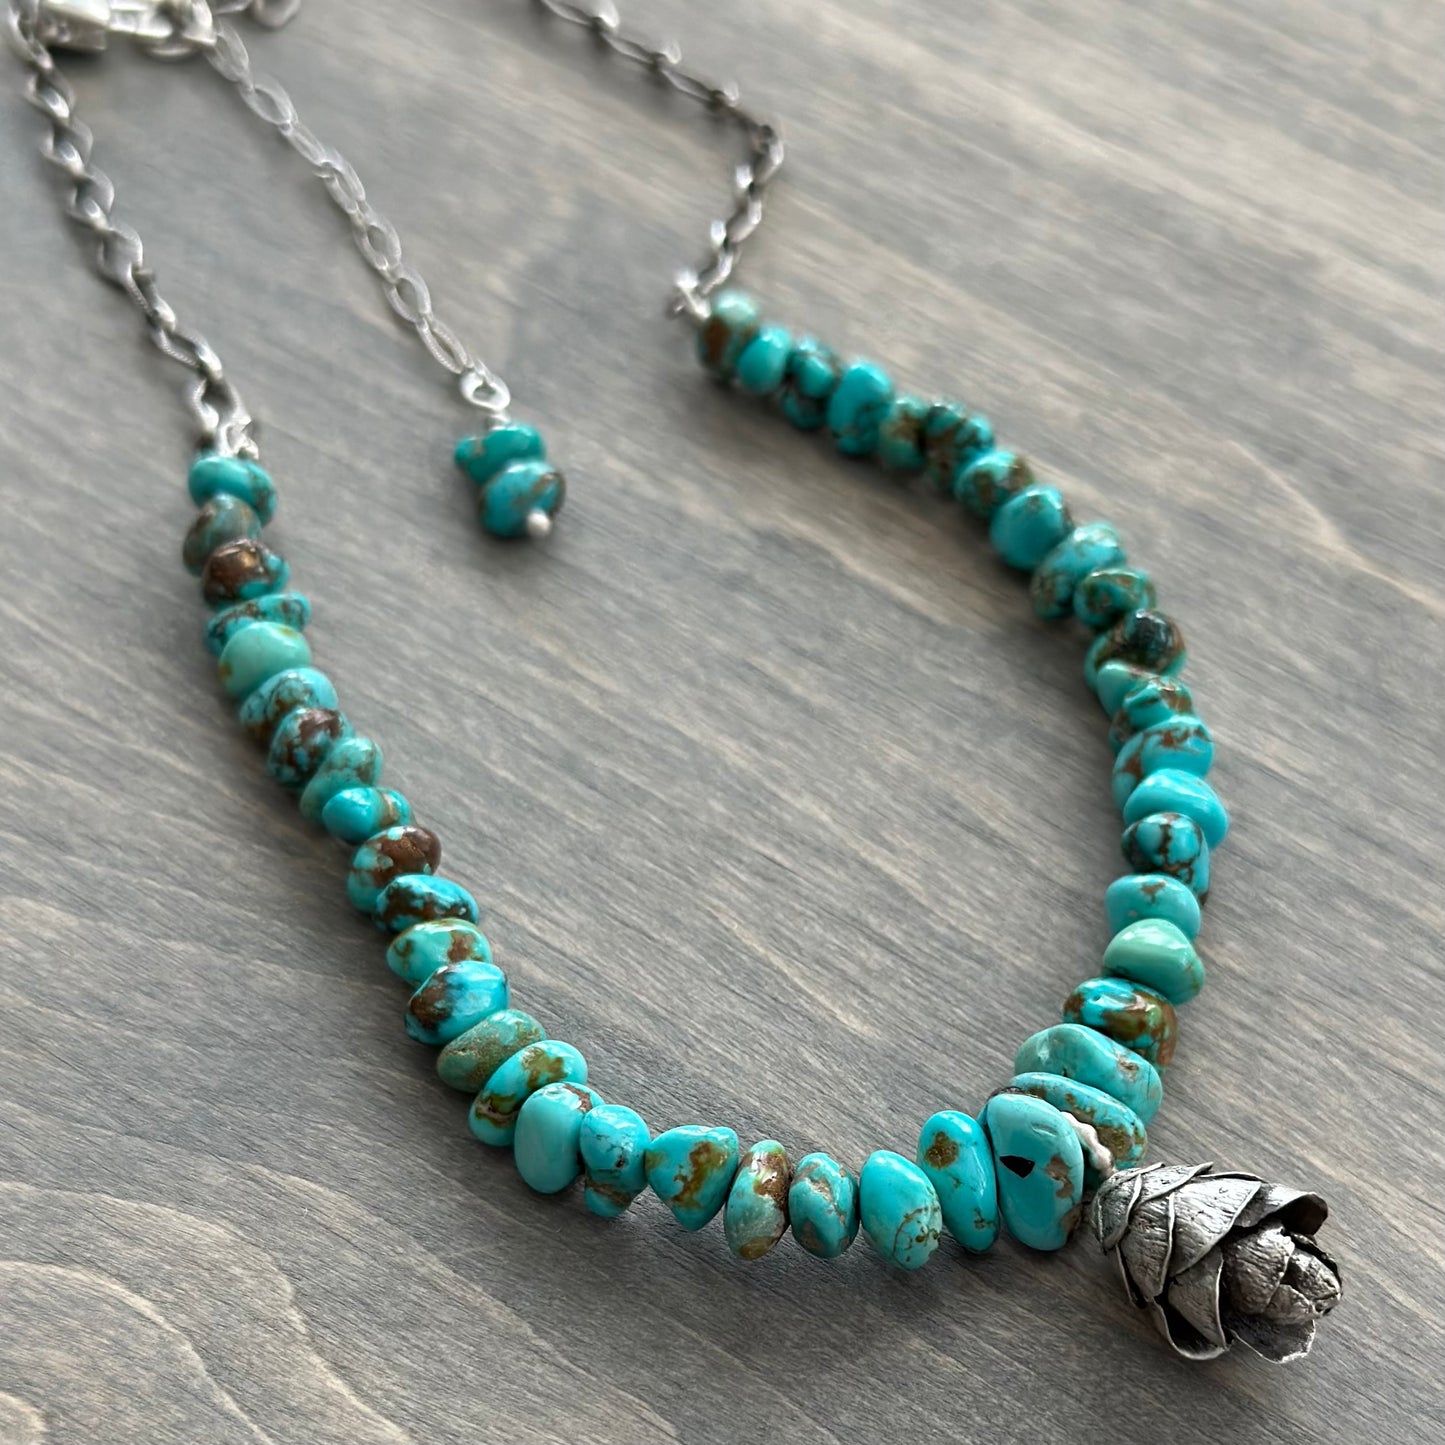 Hemlock Cone Necklace with Sierra Nevada Turquoise Beads